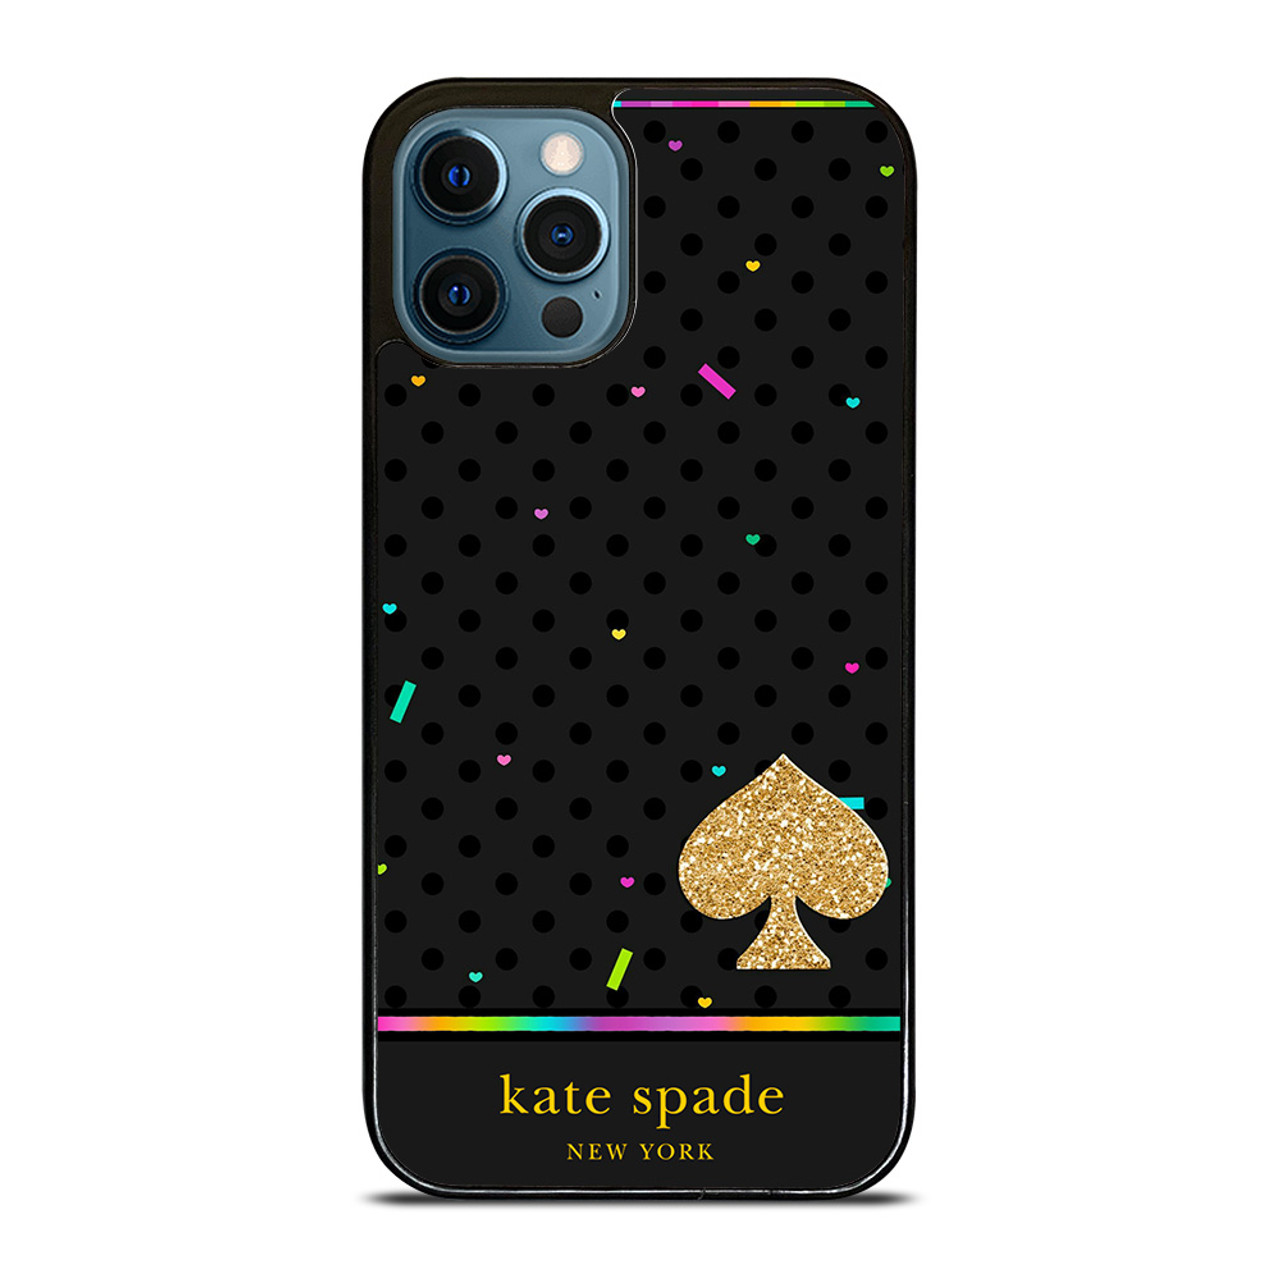 KATE SPADE RAINBOW POLKADOTS iPhone 12 Pro Max Case Cover